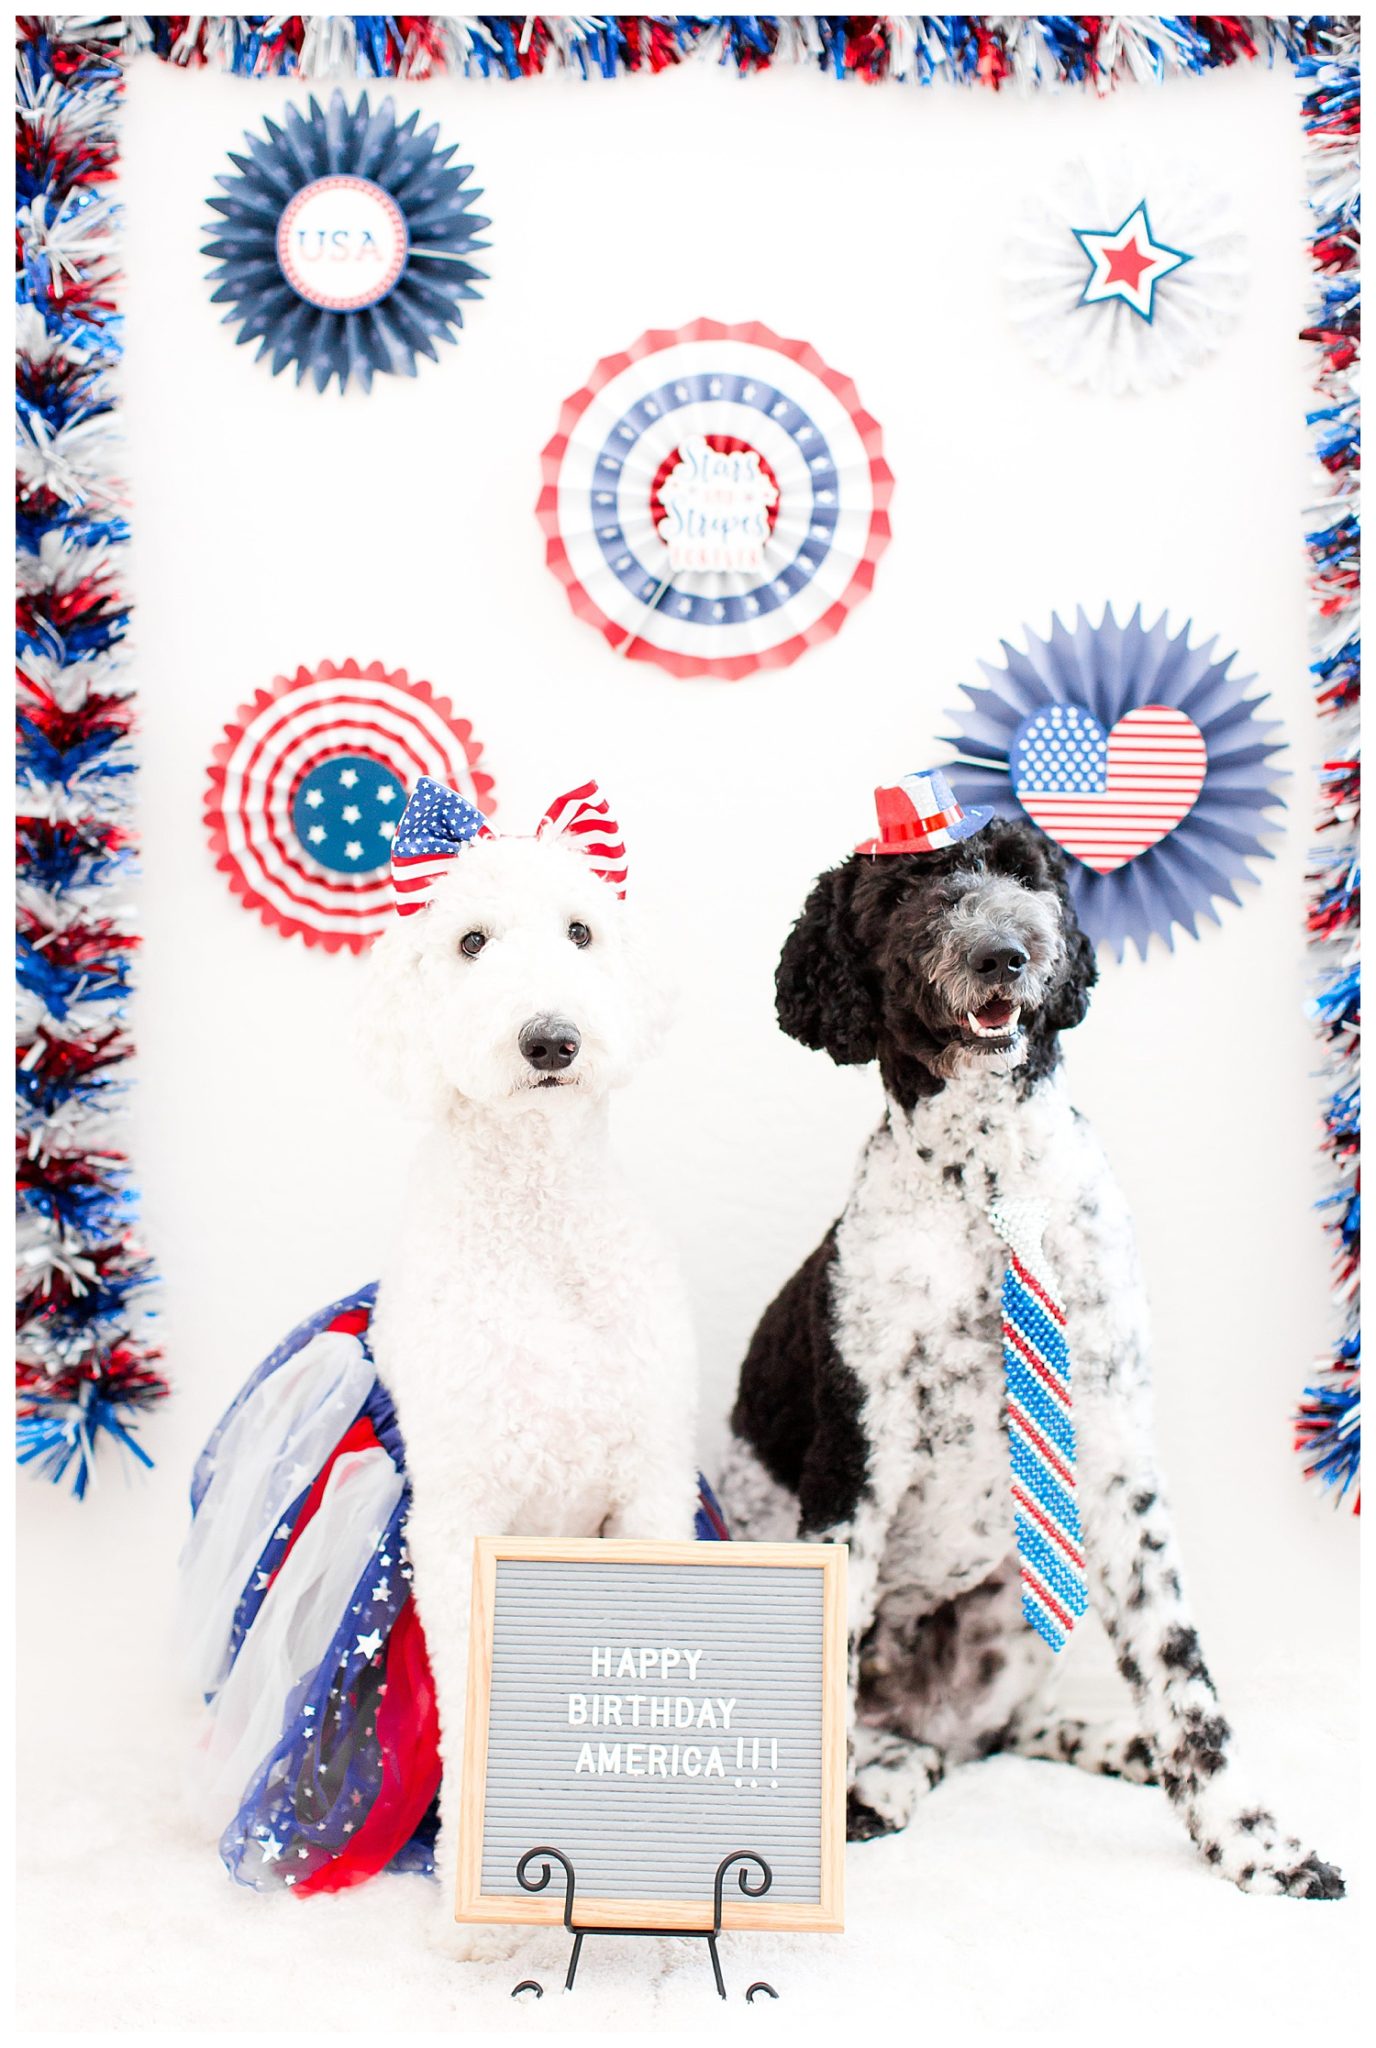 Phoenix wedding photographer, red, white and blue, USA, fourth of July goldendoodle pictures, kids with dogs, kids. with goldendoodles, red goldendoodle, black goldendoodle, black and white goldendoodle, white goldendoodle, gold goldendoodle, poodle mix, dogs celebrating forth of July, American Independence Day